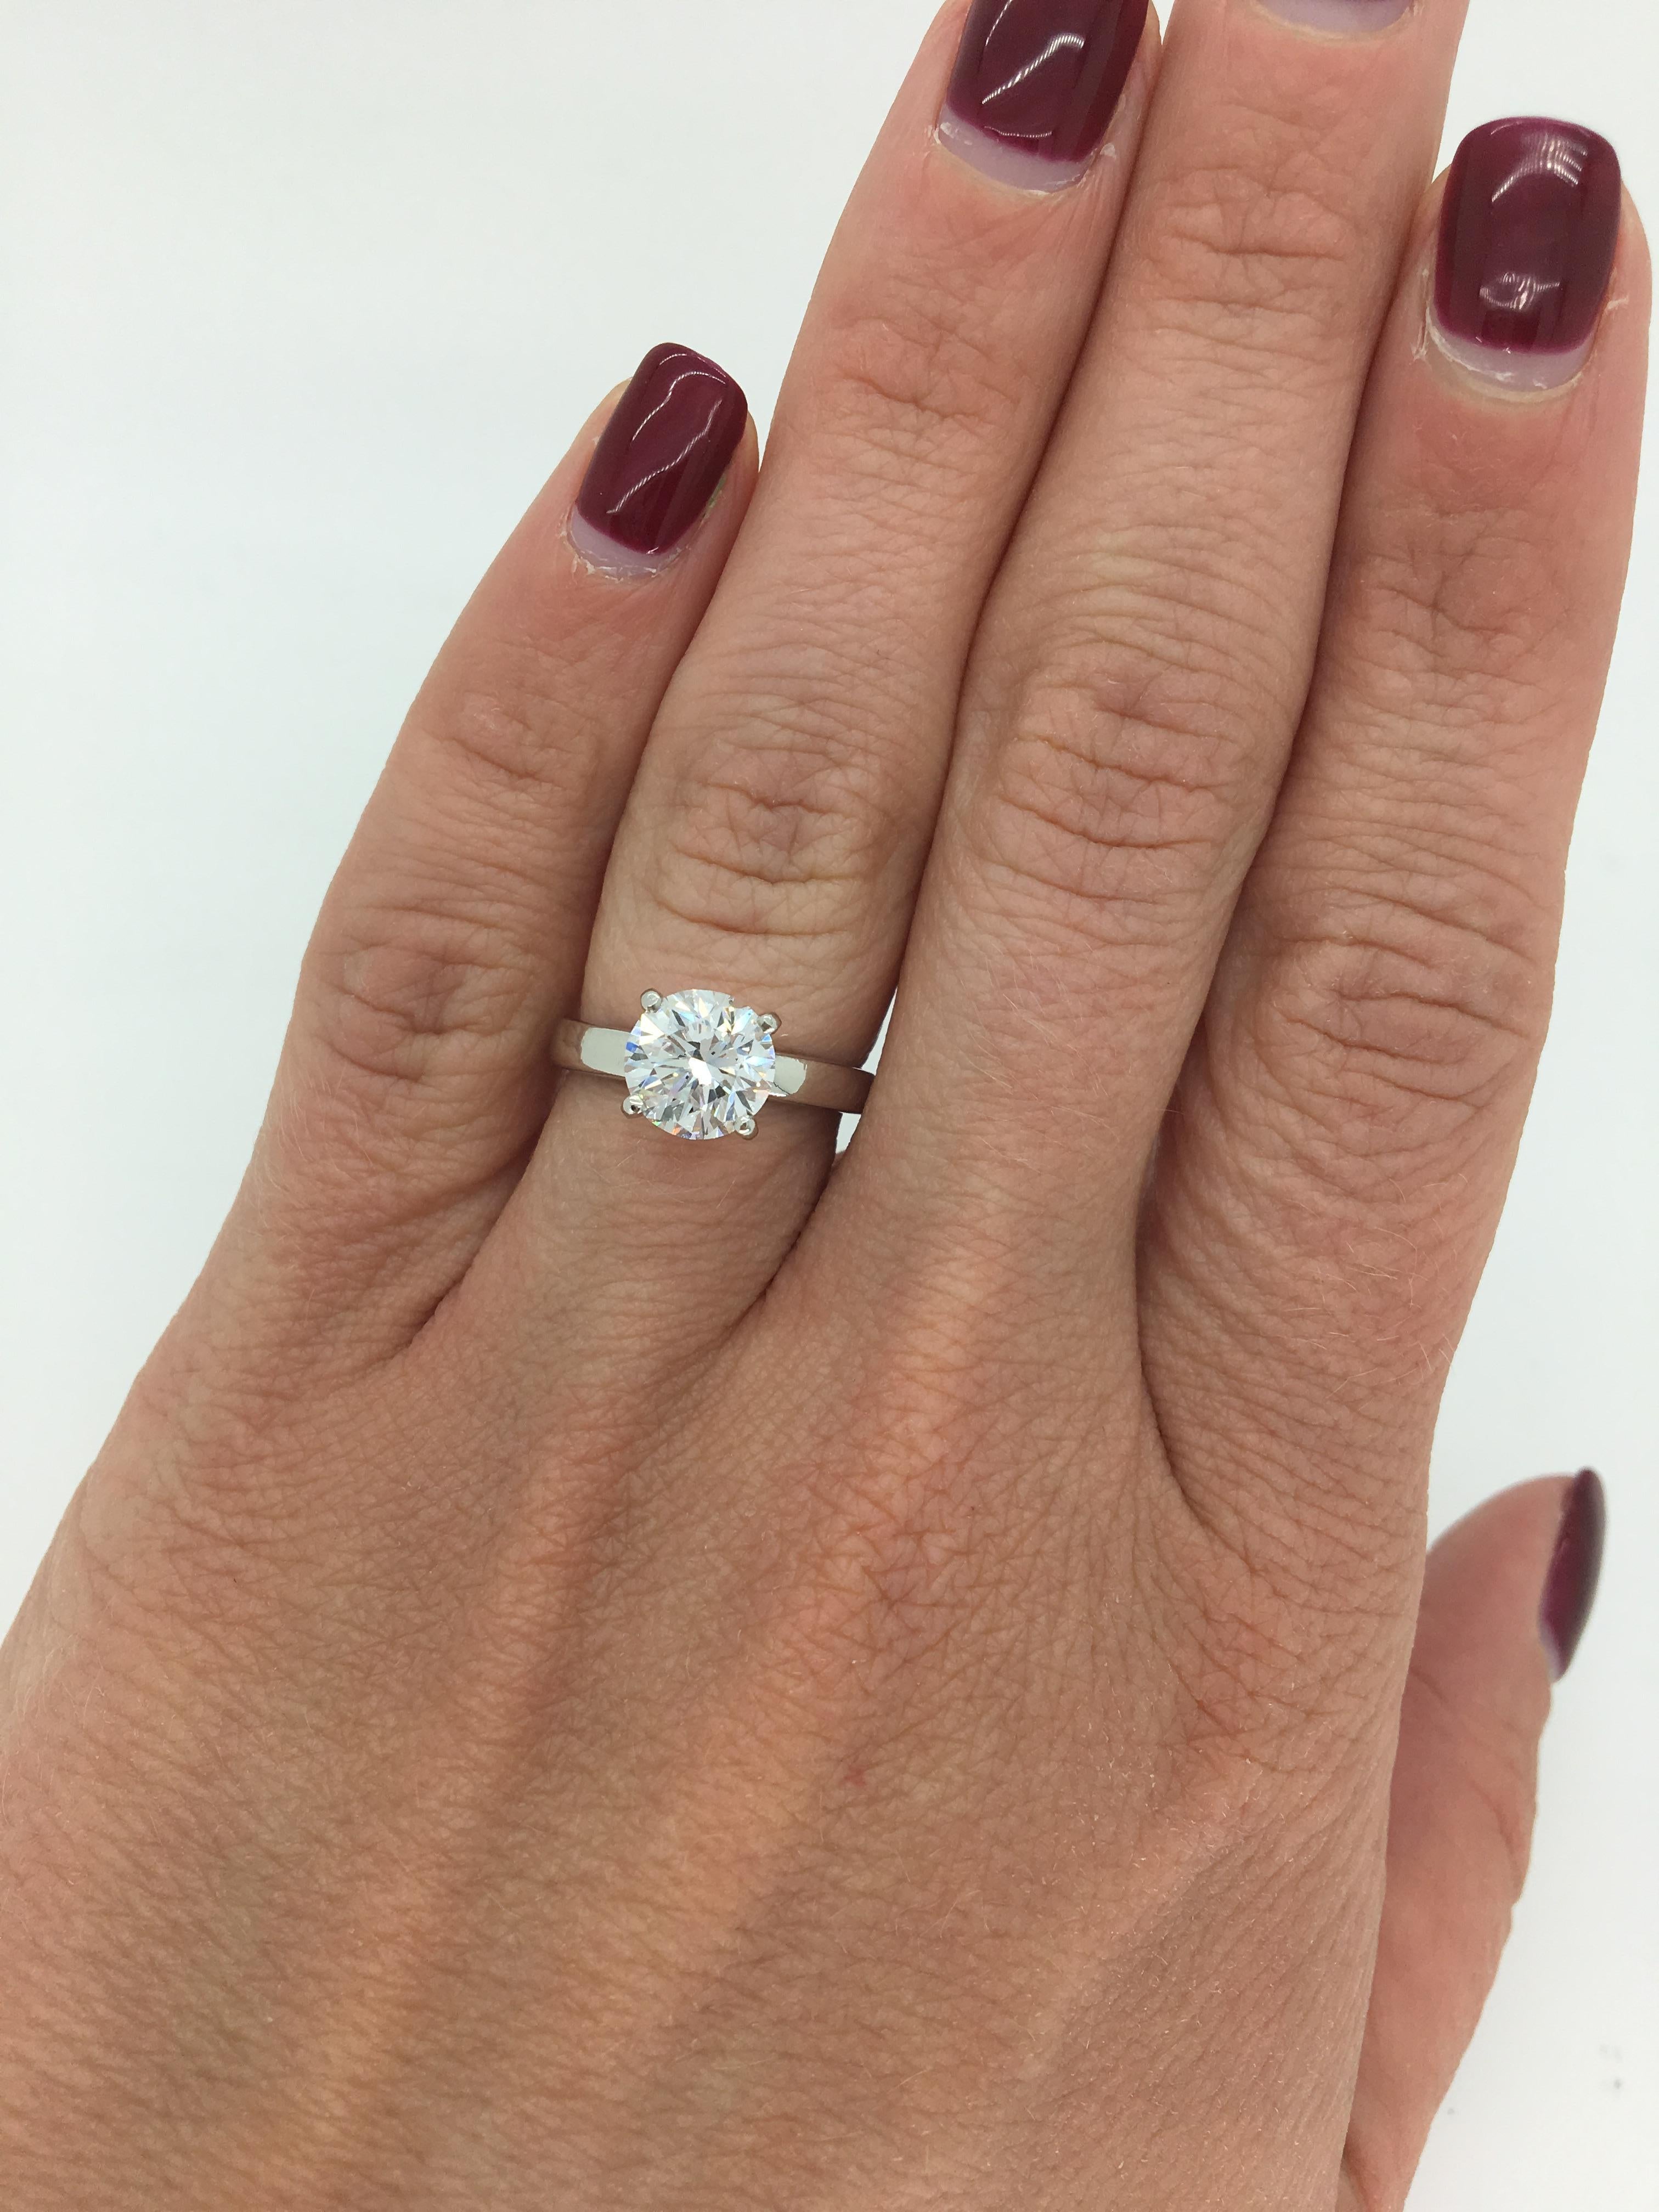 This beautiful engagement ring features a 1.61CT Round Brilliant Cut Diamond set in a Platinum solitaire ring. The featured diamond displays E color and SI1 clarity.  The ring is currently a size 5 and weighs 5.1 grams. The band is stamped PLAT to